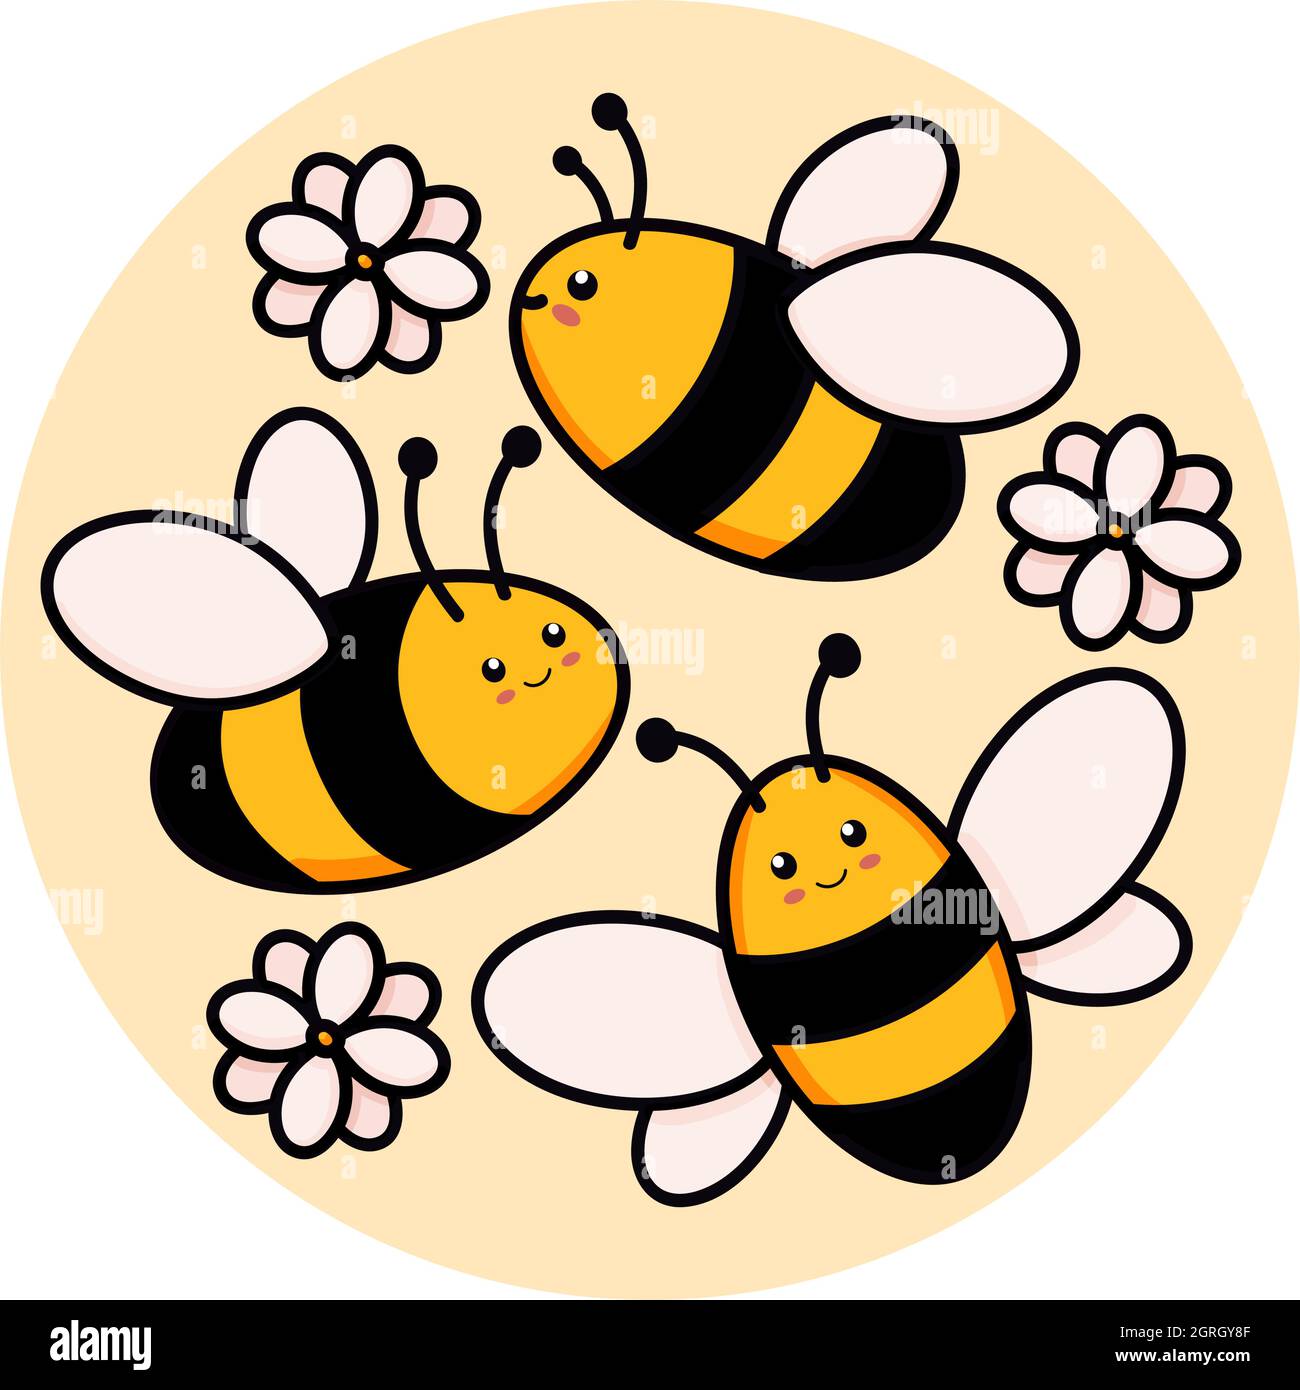 Cute set of bees in a round frame vector illustration in doodle style. Colorful collection of bumblebees in a circle, kids drawing for icon and logo design in yellow and black colors isolated on white Stock Vector